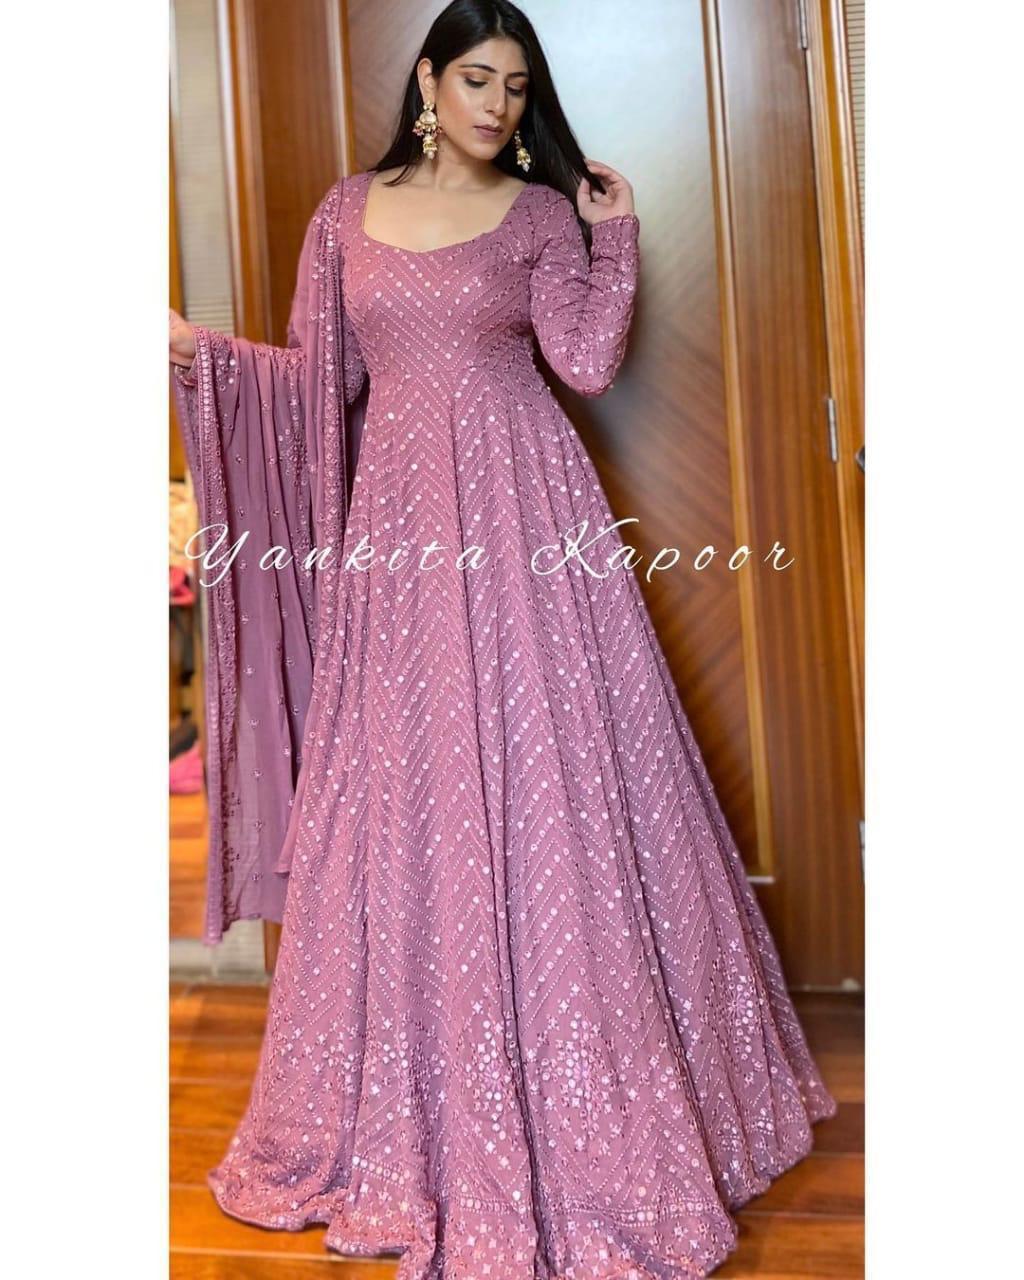 Yankita Kapoor Haldi Dress For Bride Sister DM- 7405131861 Website: [Link  In Bio] -Cash On Delivery Available -Free Shipping In India ... | Instagram